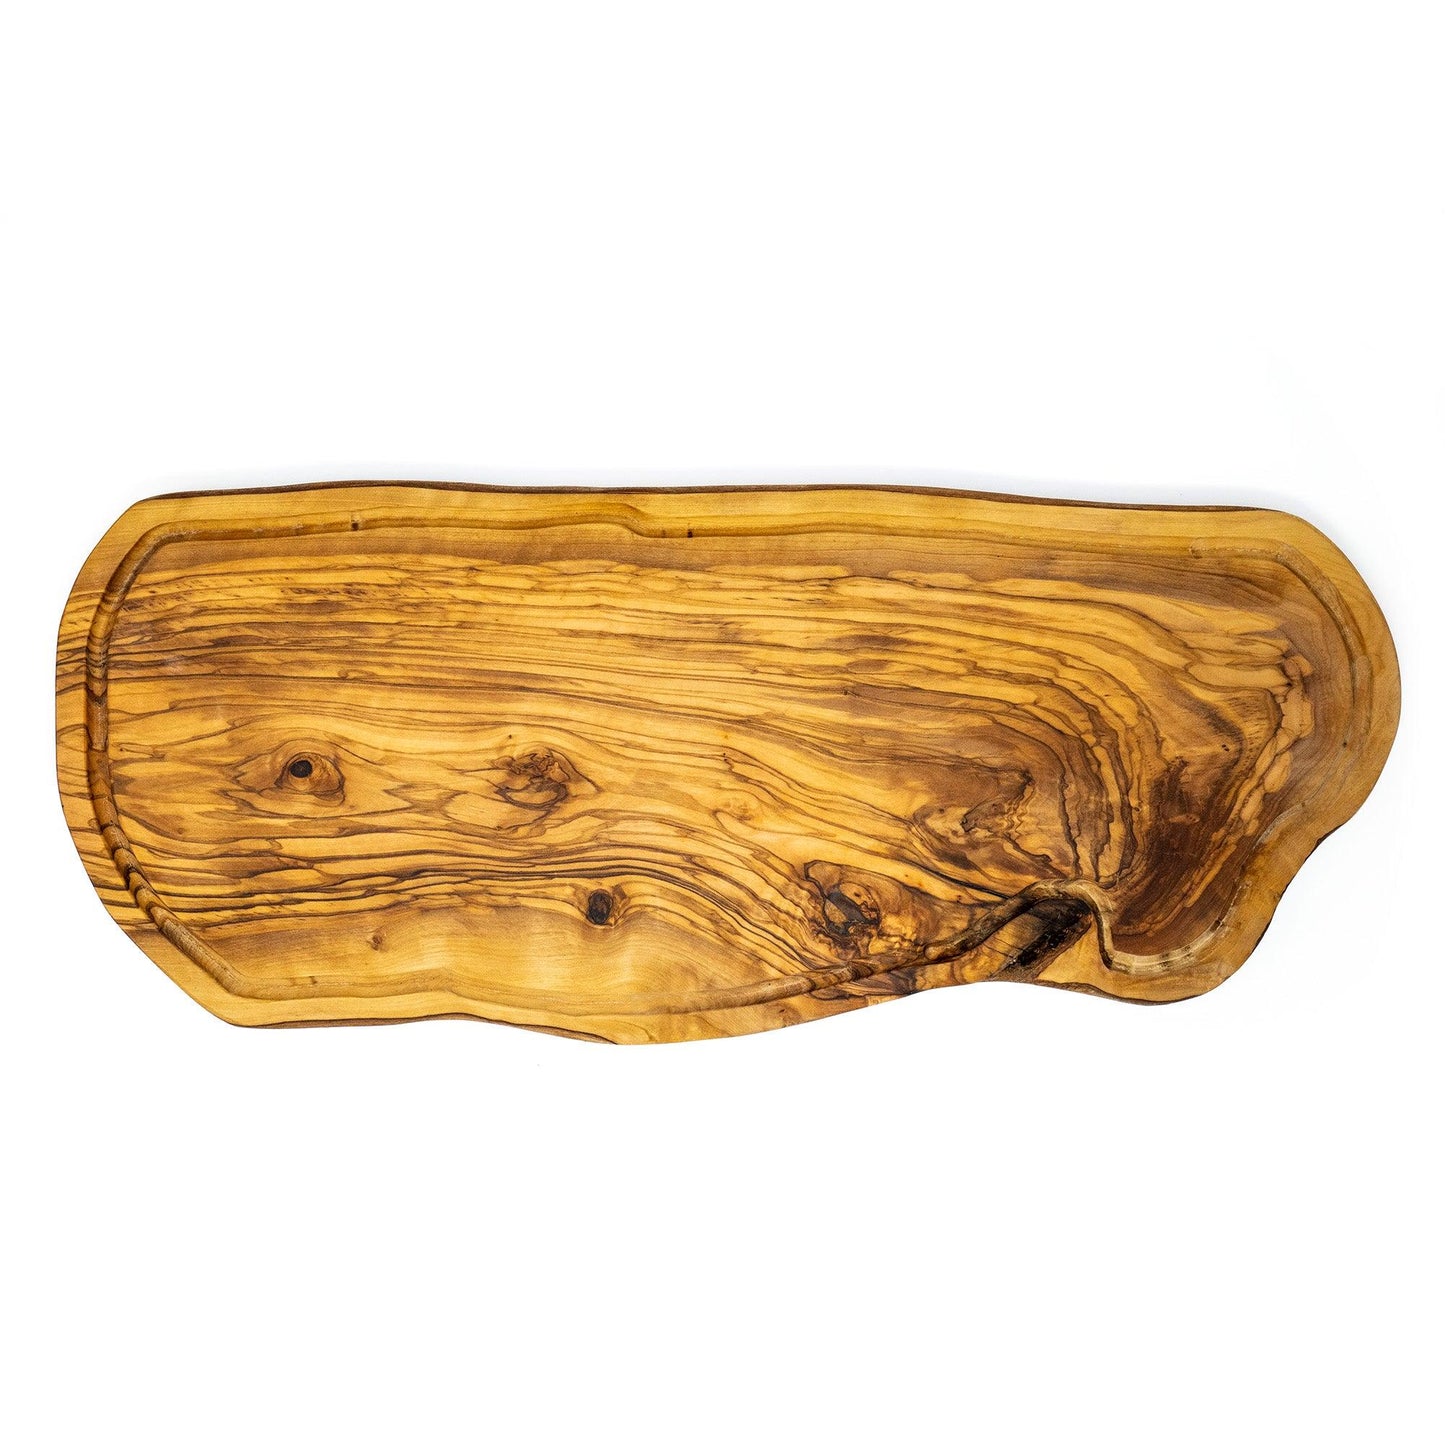 Rustic Steak and Serving Board With Juice Groove - Goya Blue